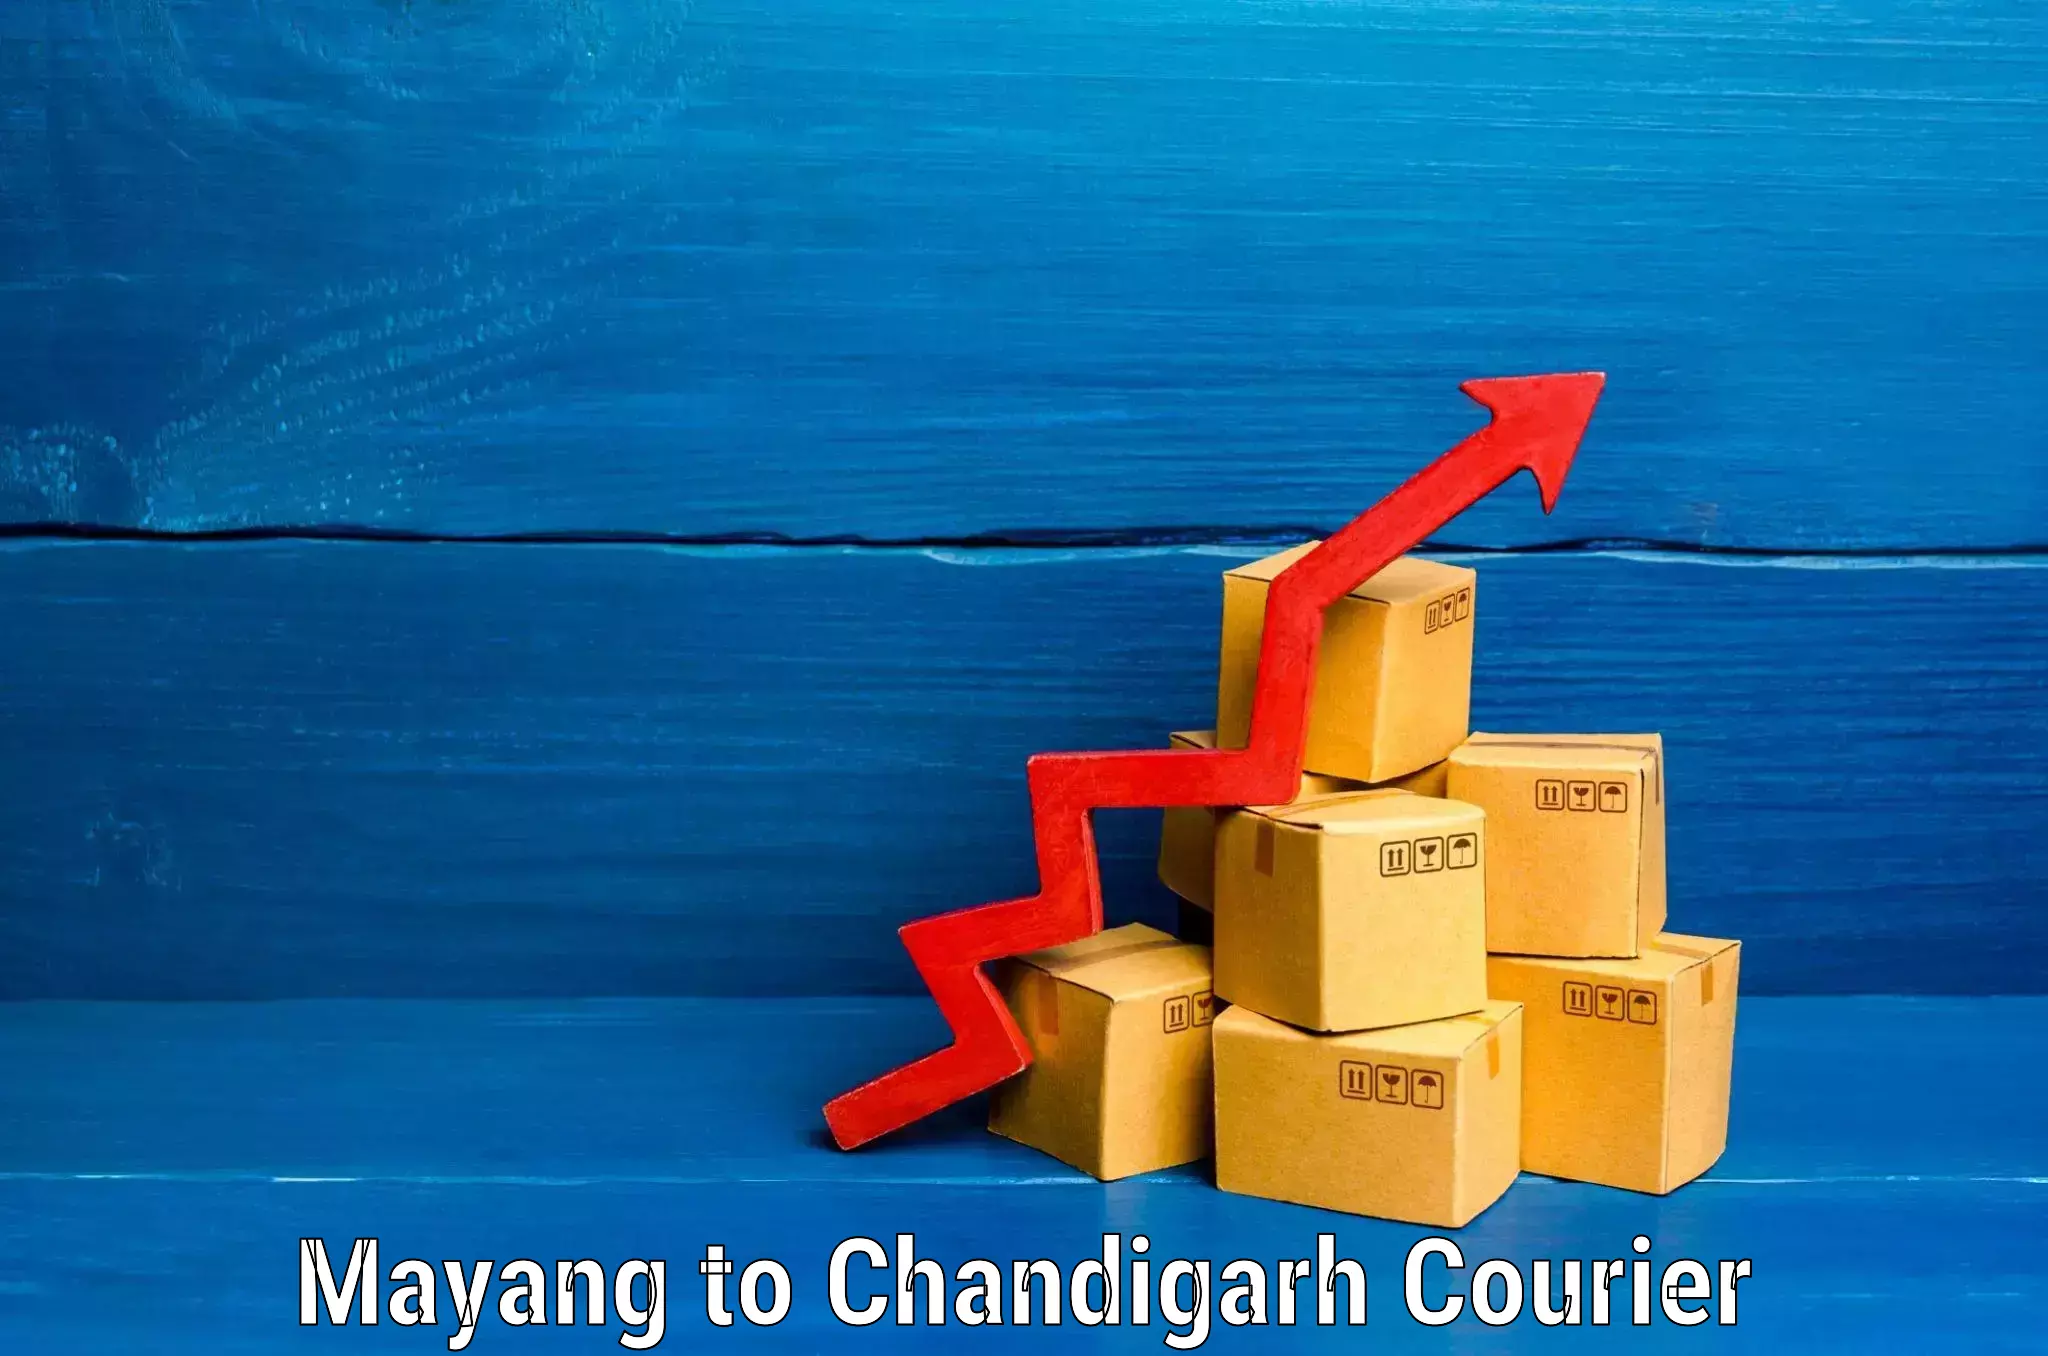 Luggage shipment specialists Mayang to Chandigarh